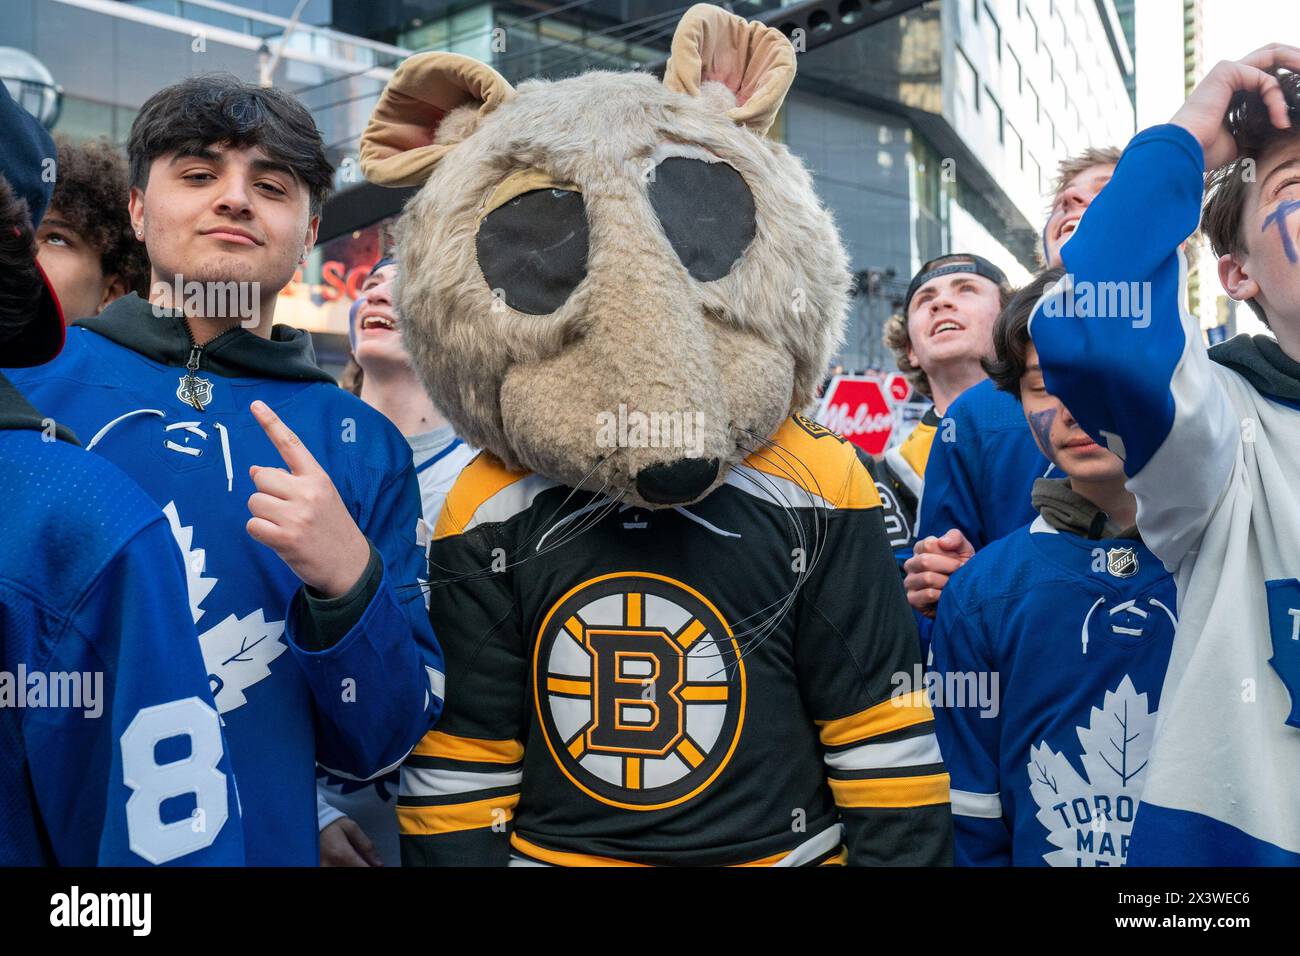 Fan dressed as Boston Bruins mouse at Maple Leaf Square outside Scotibank Arena, watching Round 1, Game 4 playoff game of Toronto Maple Leafs vs Boston Bruins playoff game on a giant screen. During Toronto Maple Leafs playoff games, Maple Leaf Square transforms into a sea of blue and white, echoing with the chants of passionate fans eagerly rallying behind their team's quest for victory. The electric atmosphere radiates anticipation and excitement, creating unforgettable memories for both die-hard supporters and casual observers alike. Stock Photo